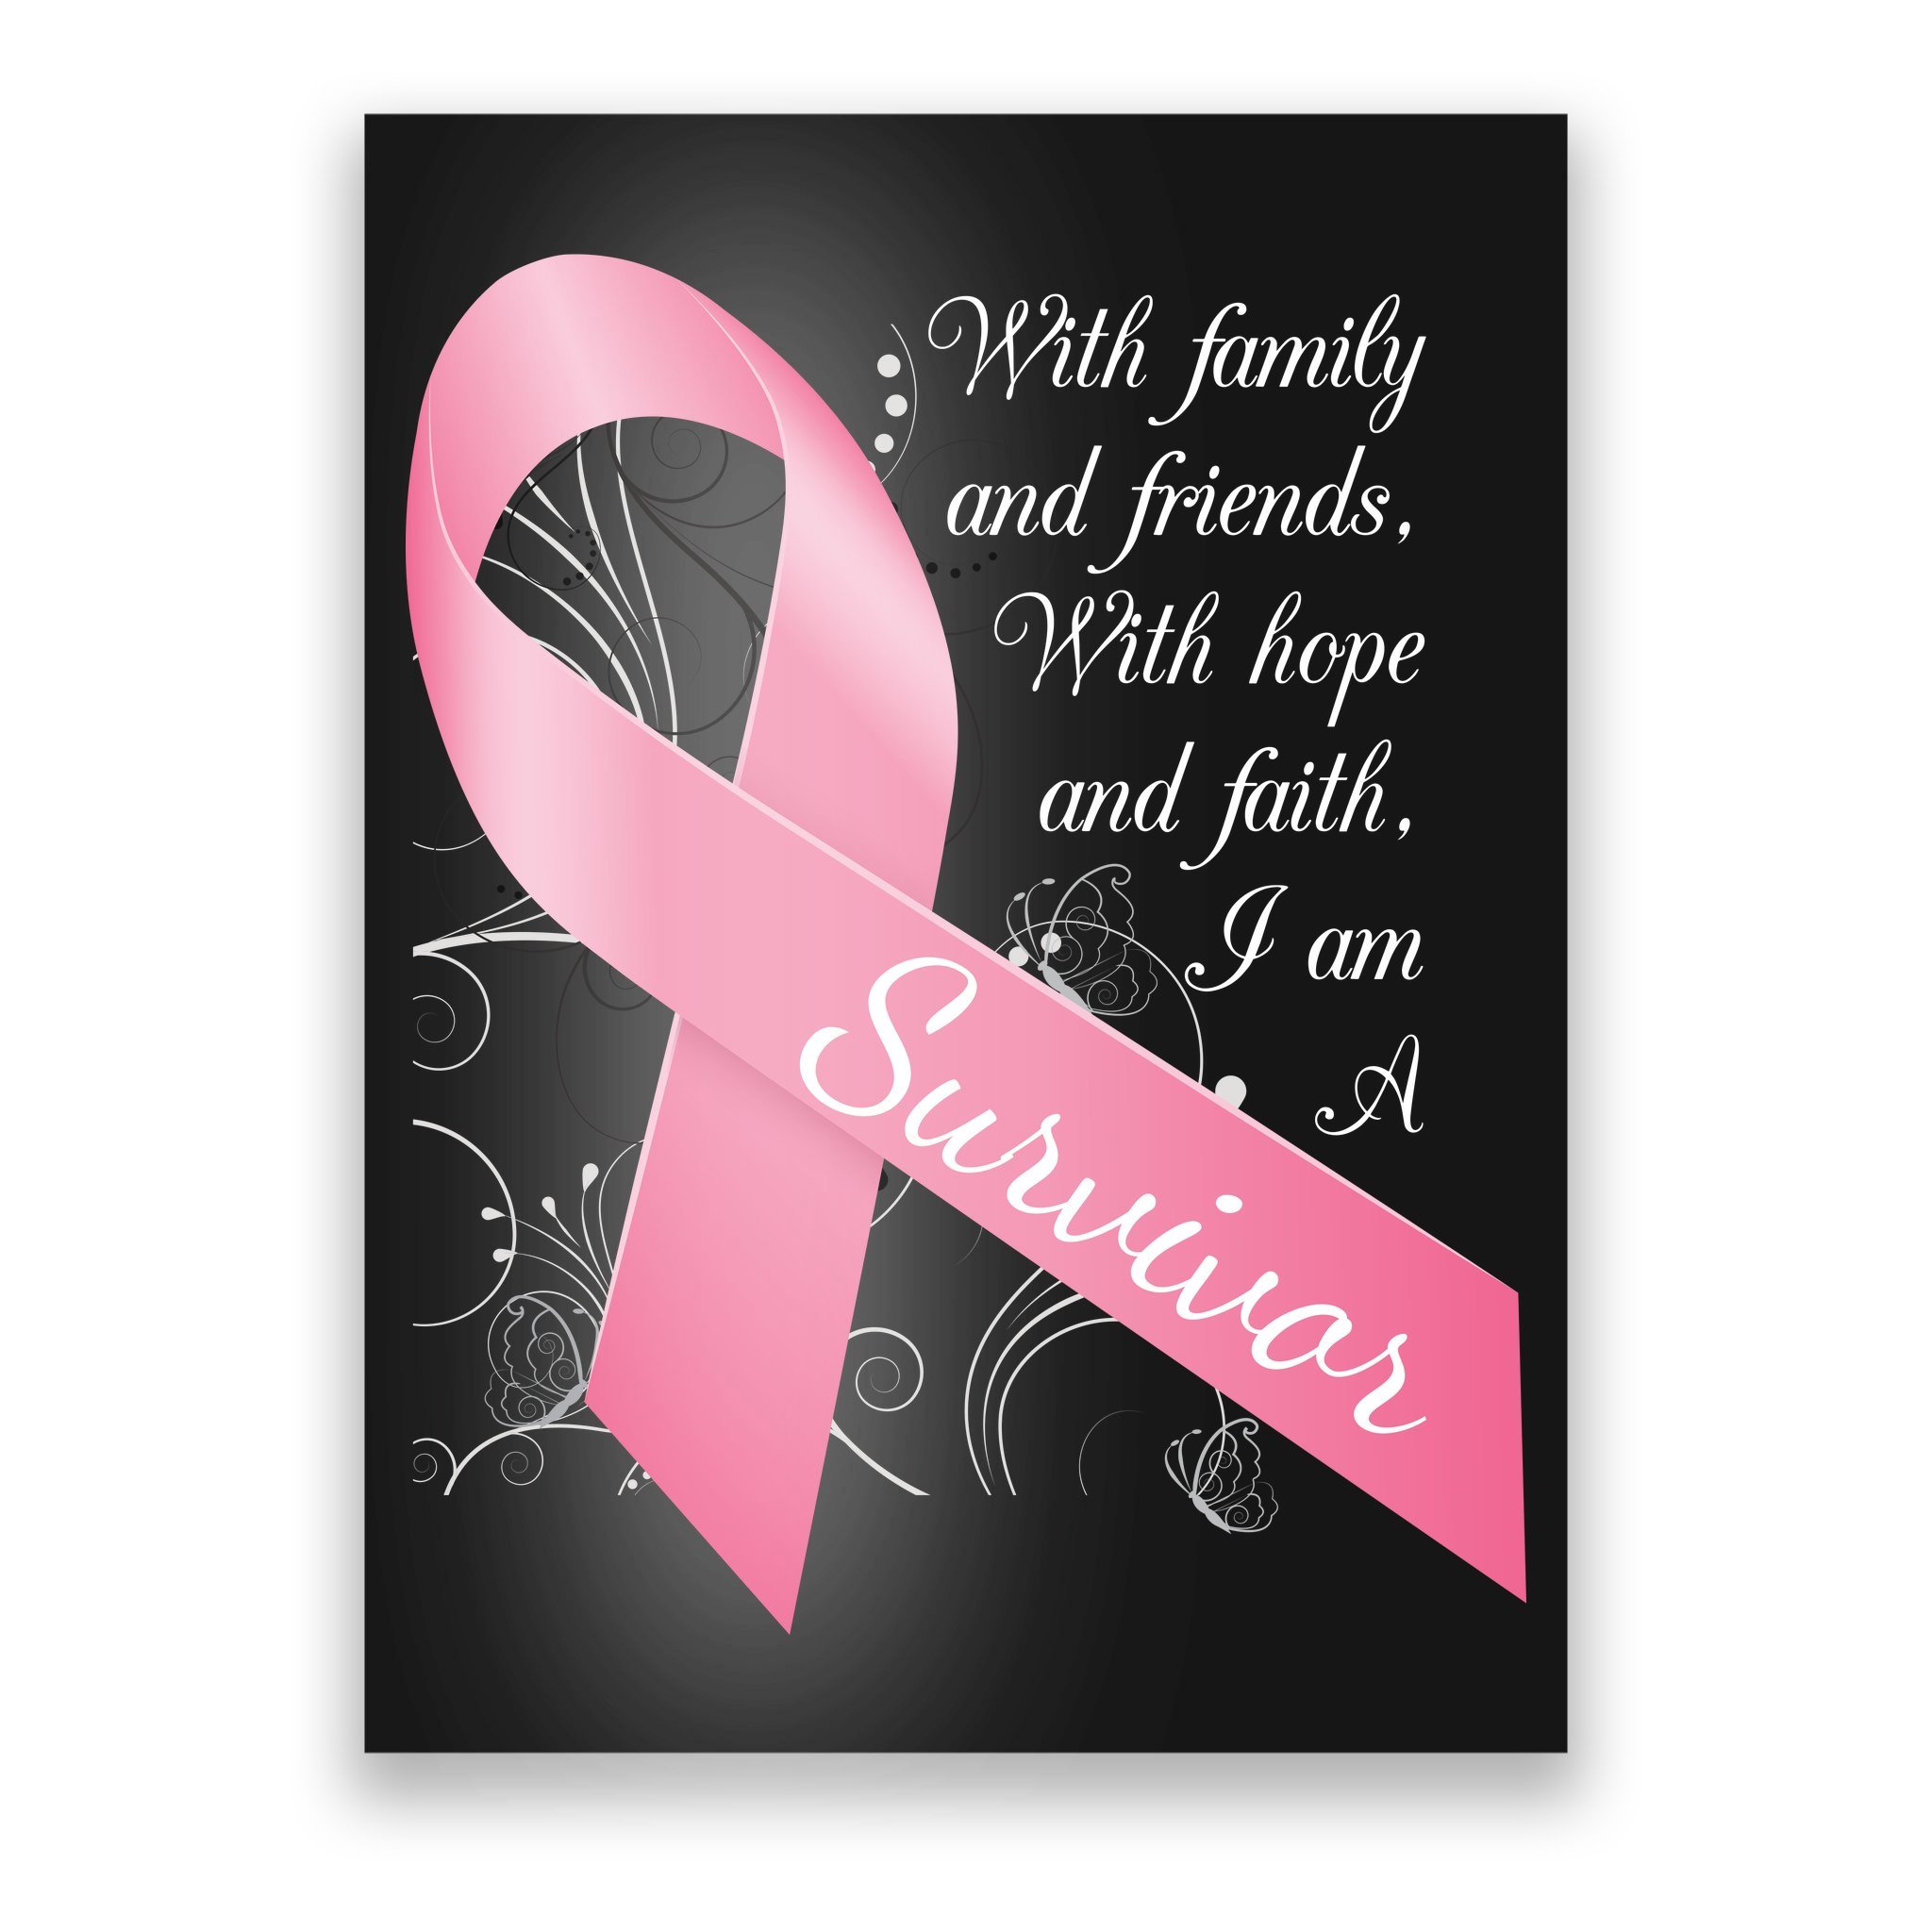 https://images3.teeshirtpalace.com/images/productImages/breast-cancer-survivor-family-friends-hope-faith--black-post-garment.jpg